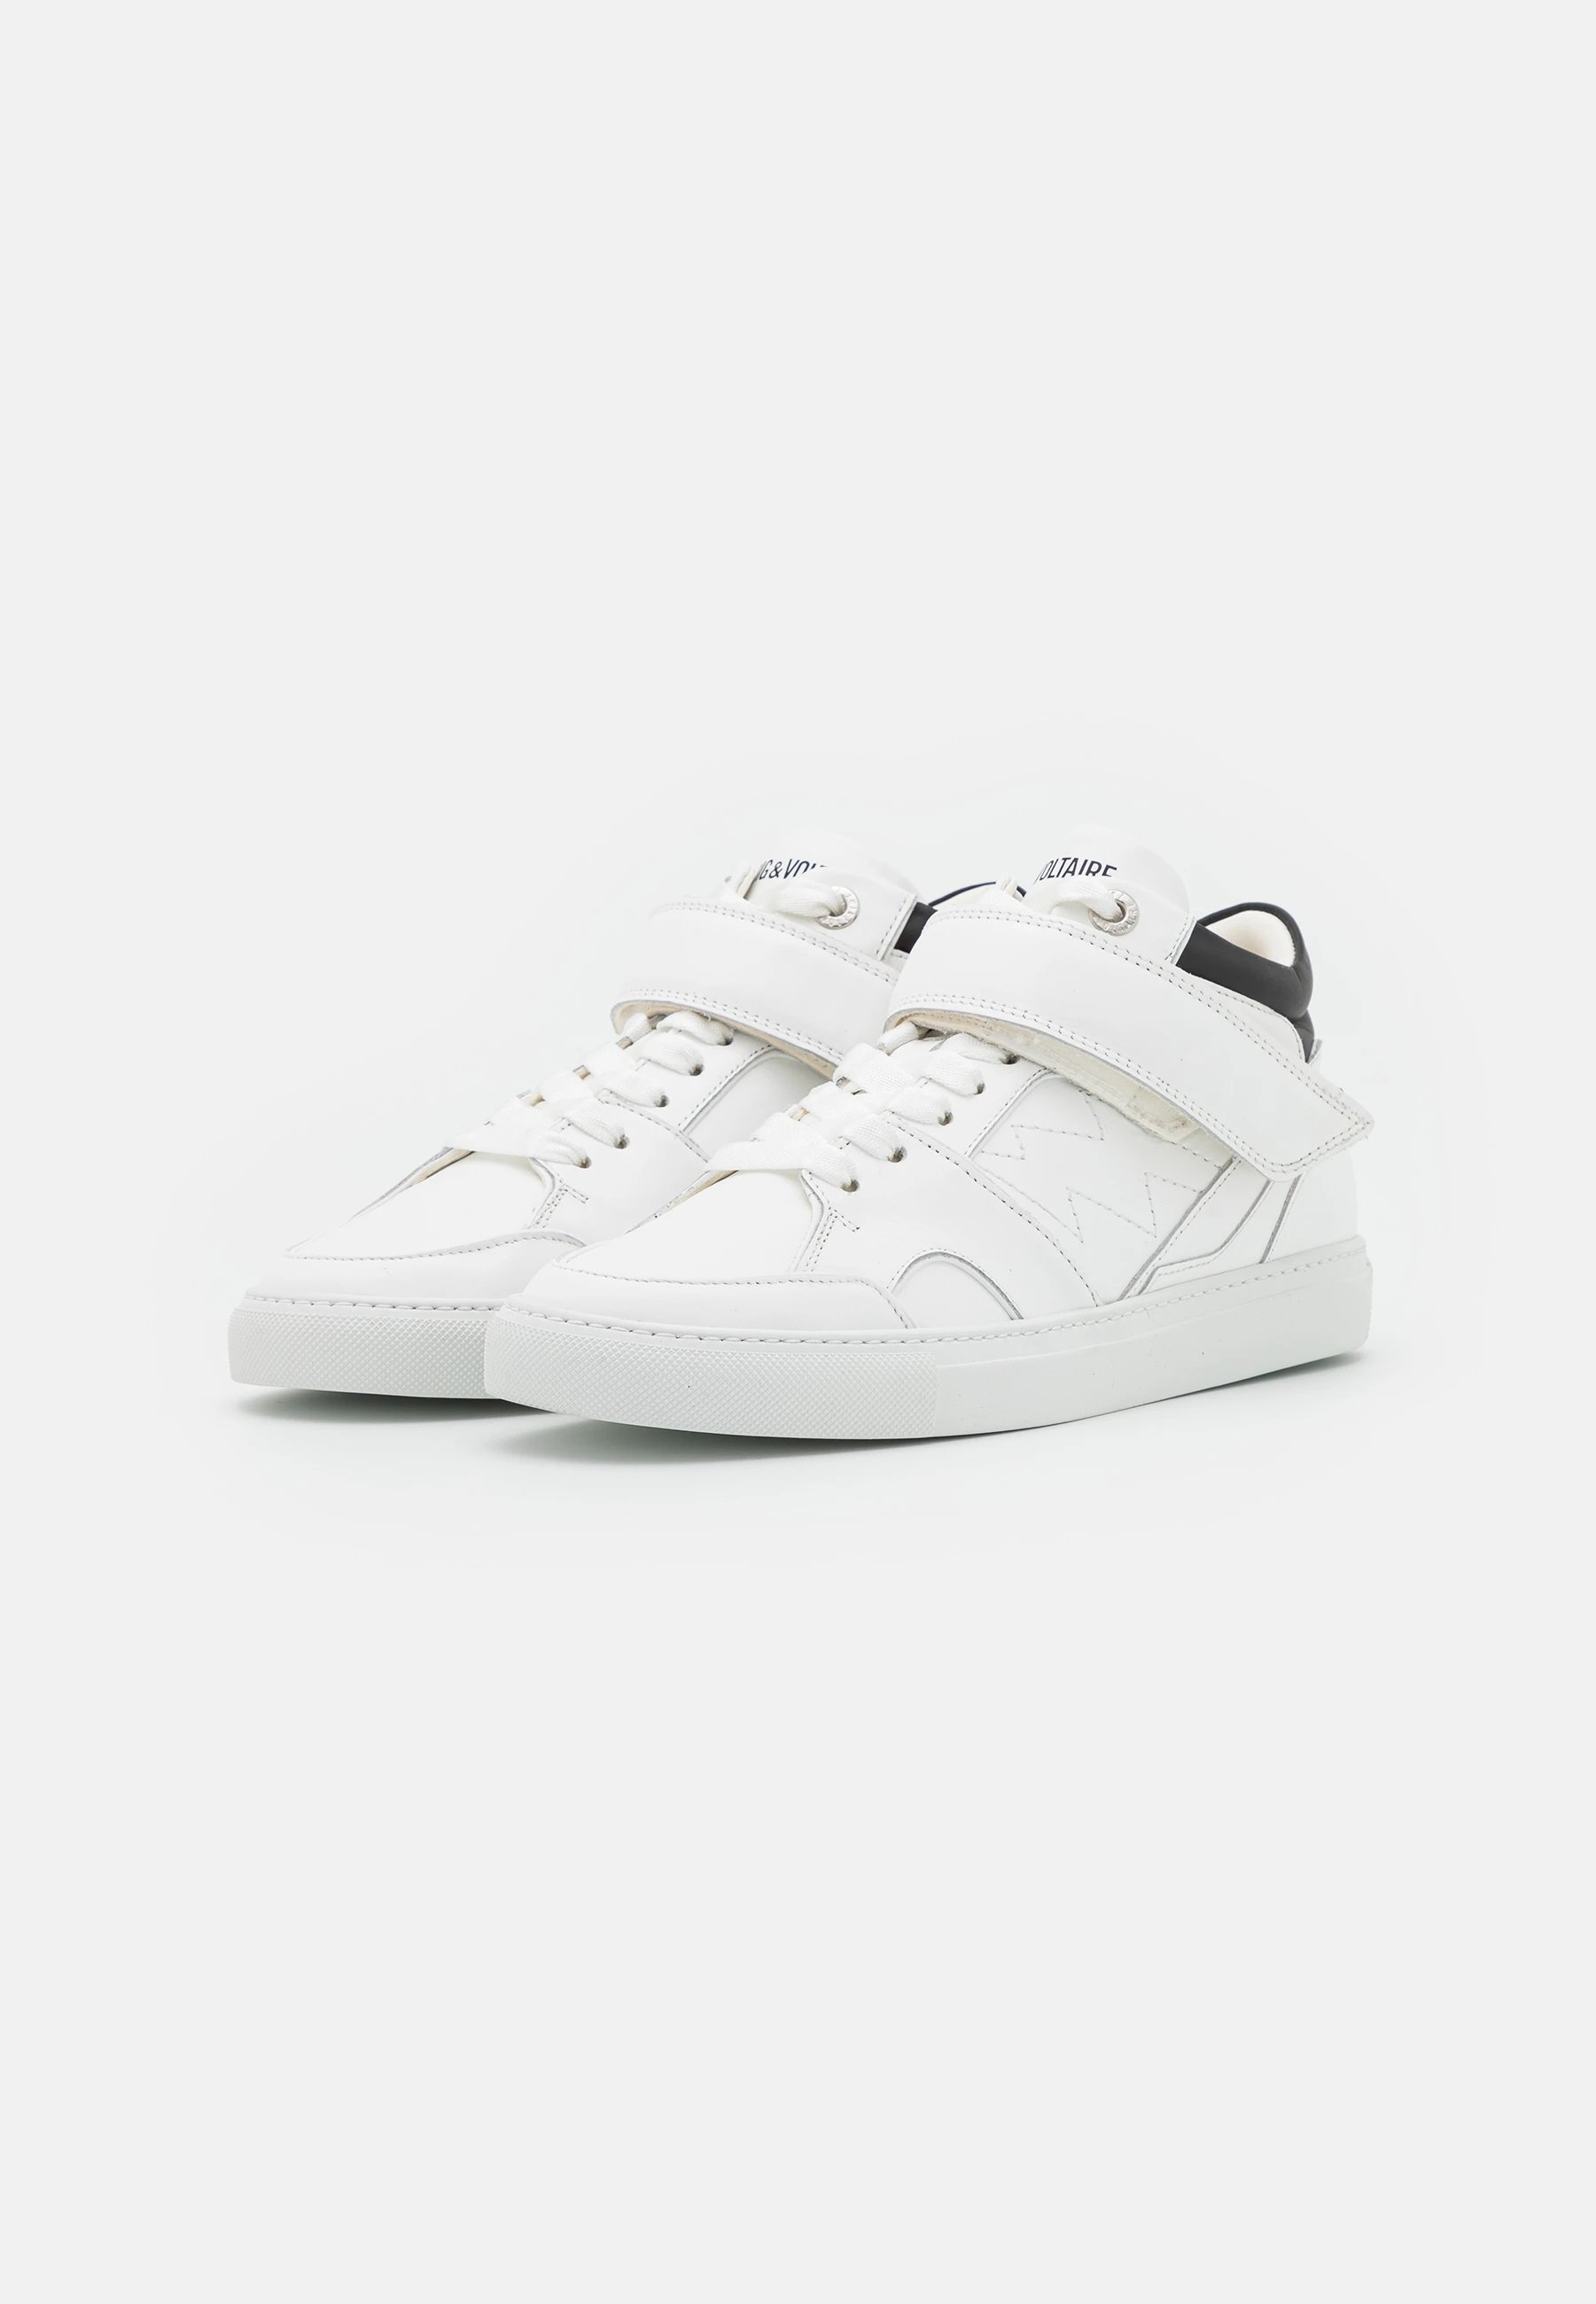 Zadig & Voltaire ZV1747 Mid Flash Sneakers in White.jpg